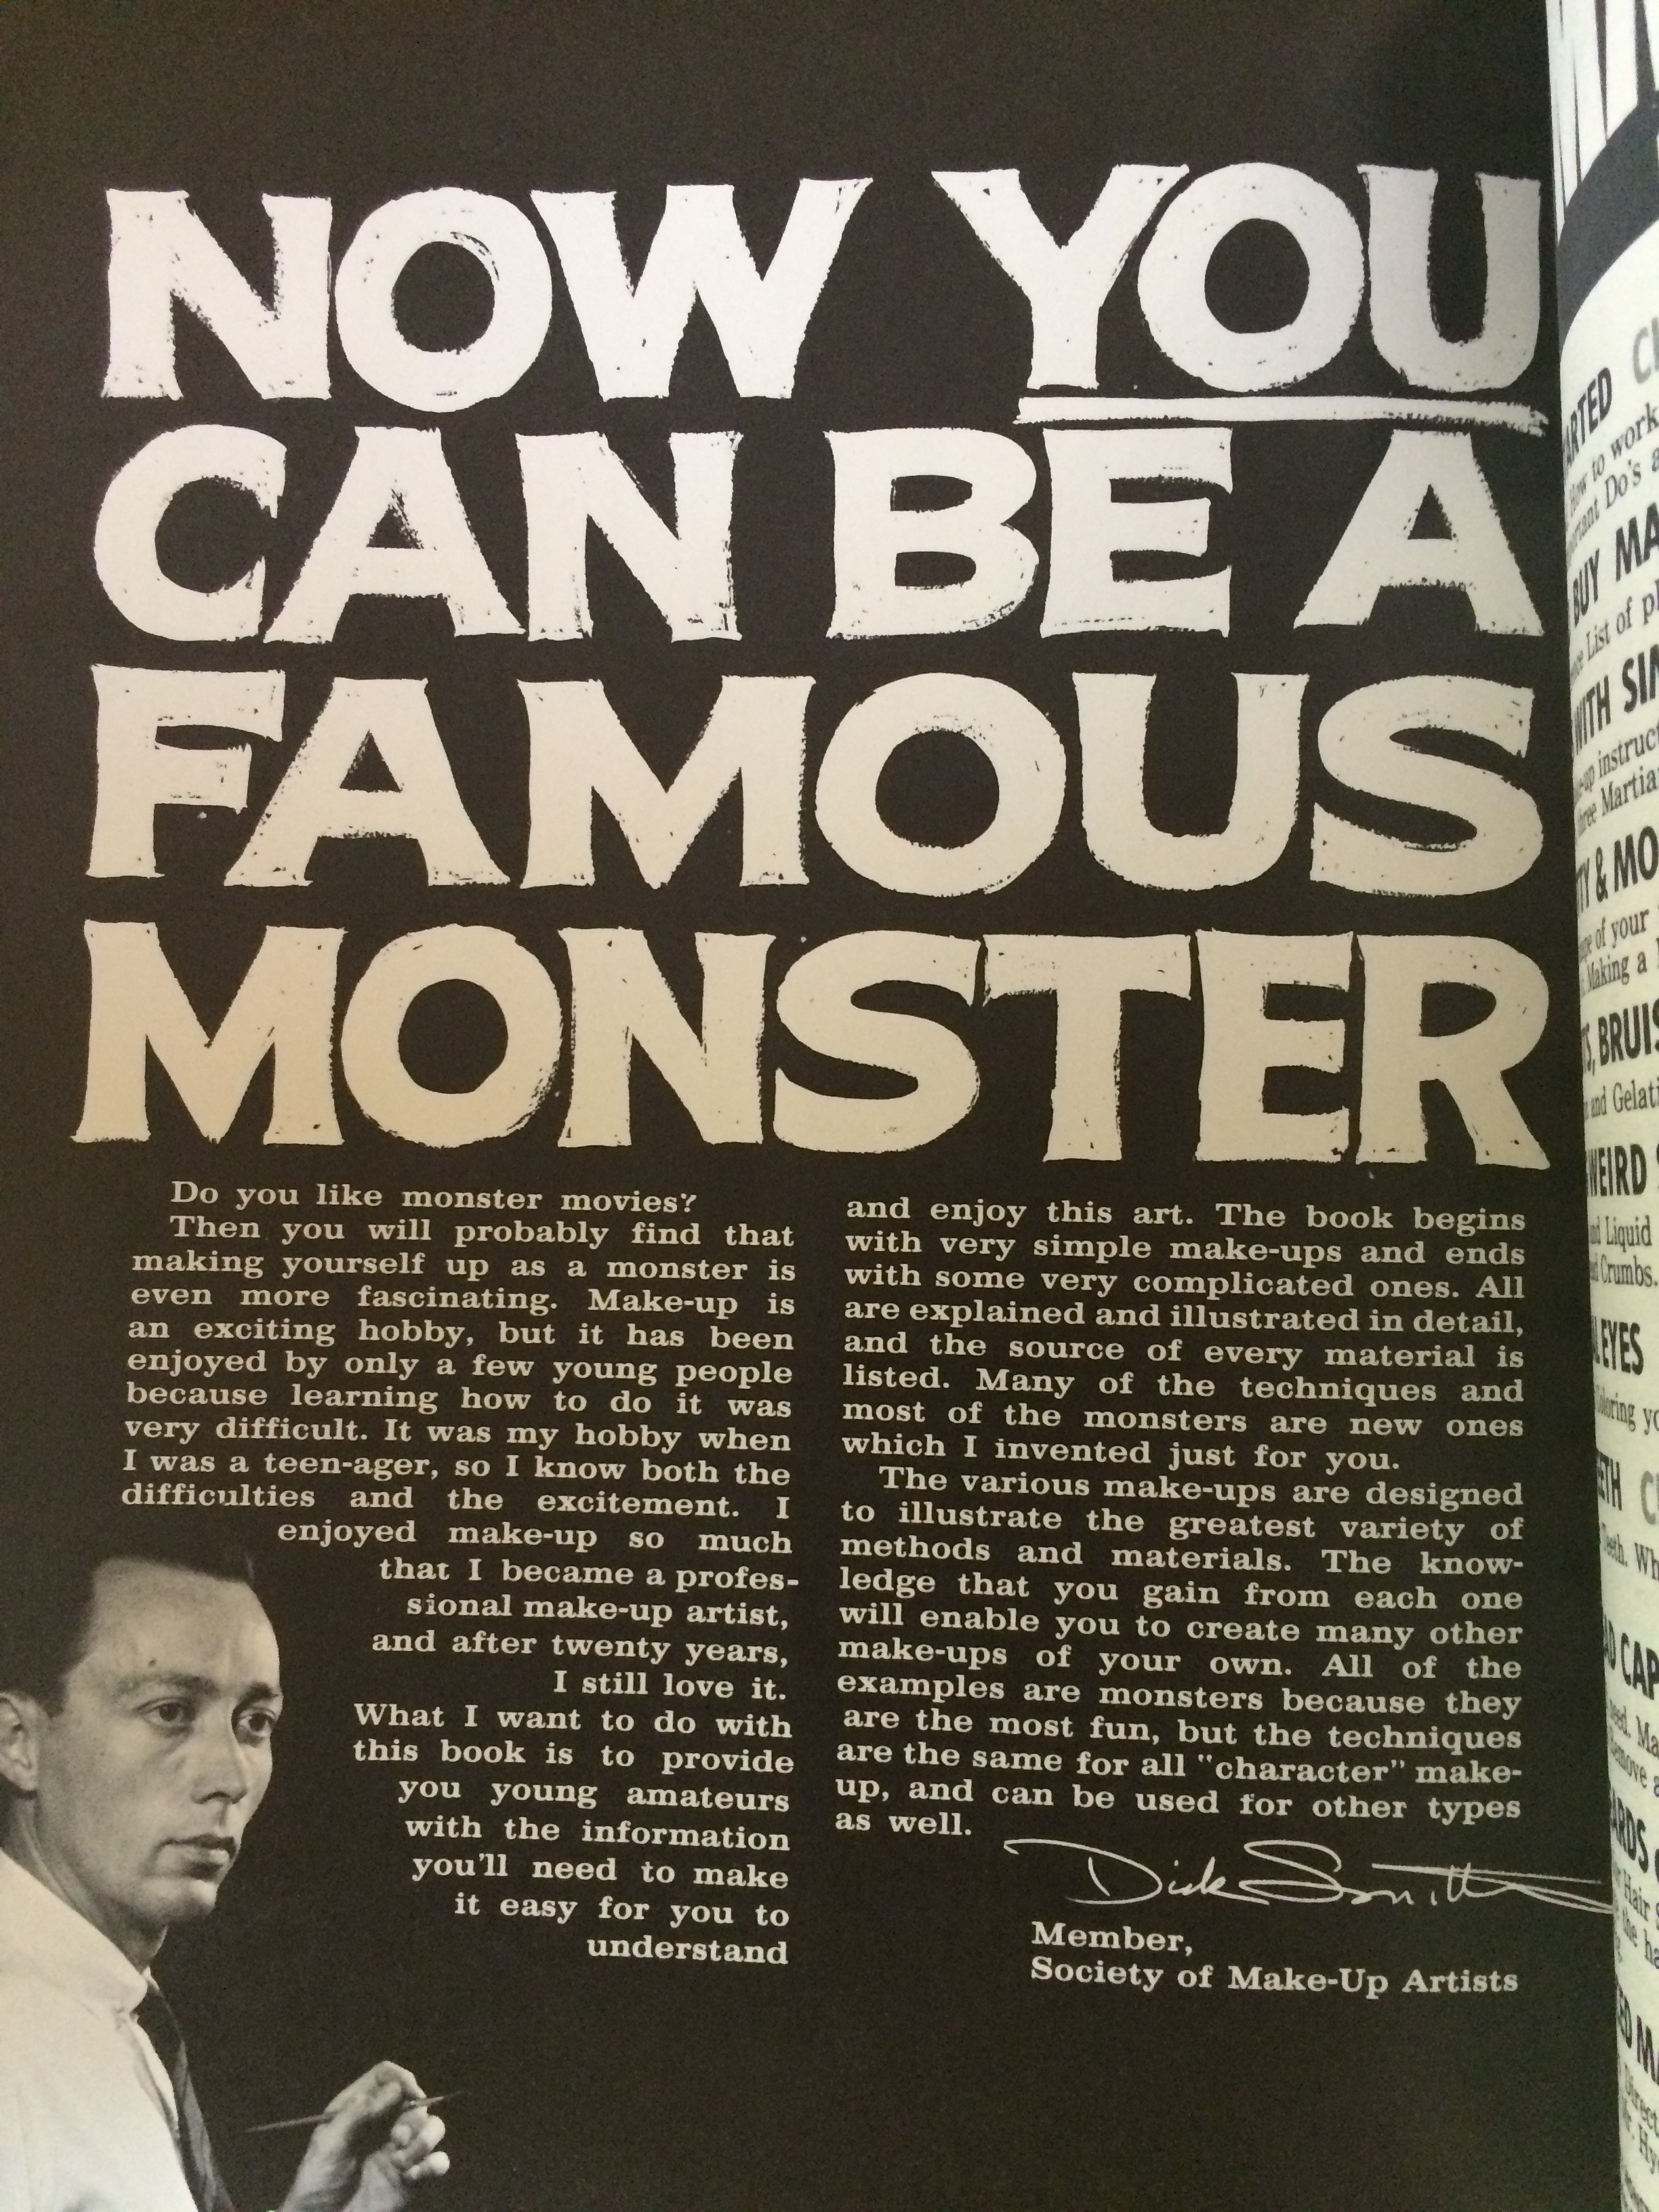 Do-It-Yourself Monster Make-Up Handbook by Dick Smith (Warren Publishing, 1965)